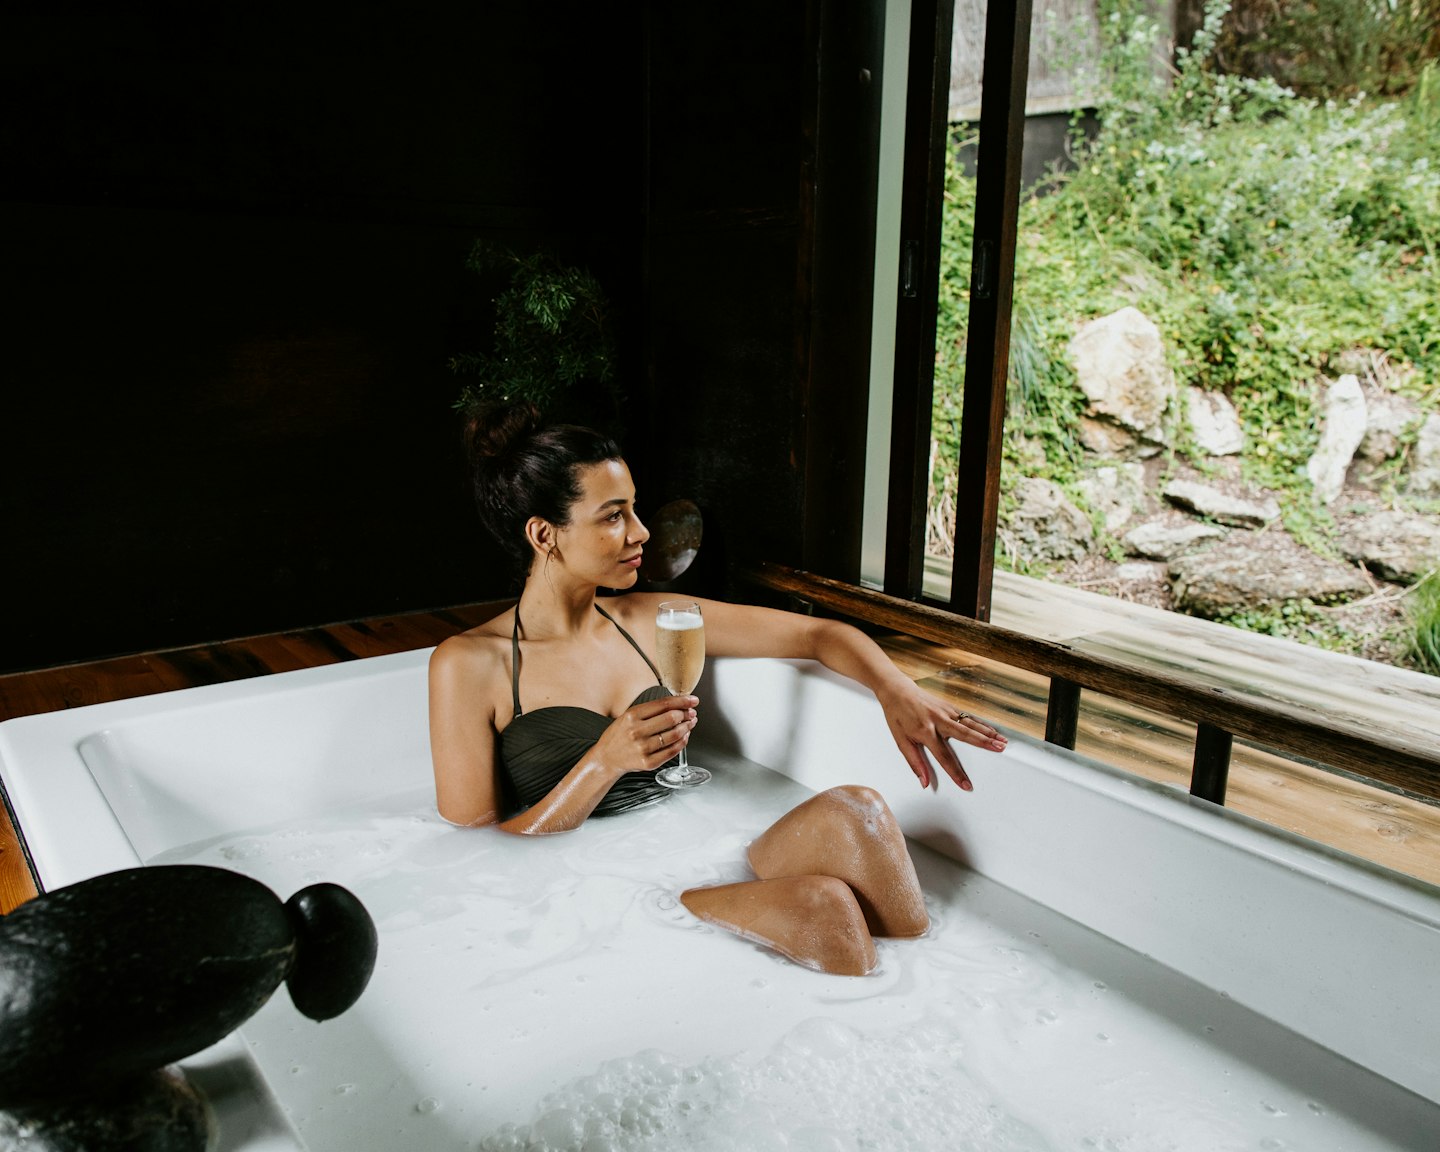 woman in bathing suit sitting in private bath with glass of champagne looking out at nature